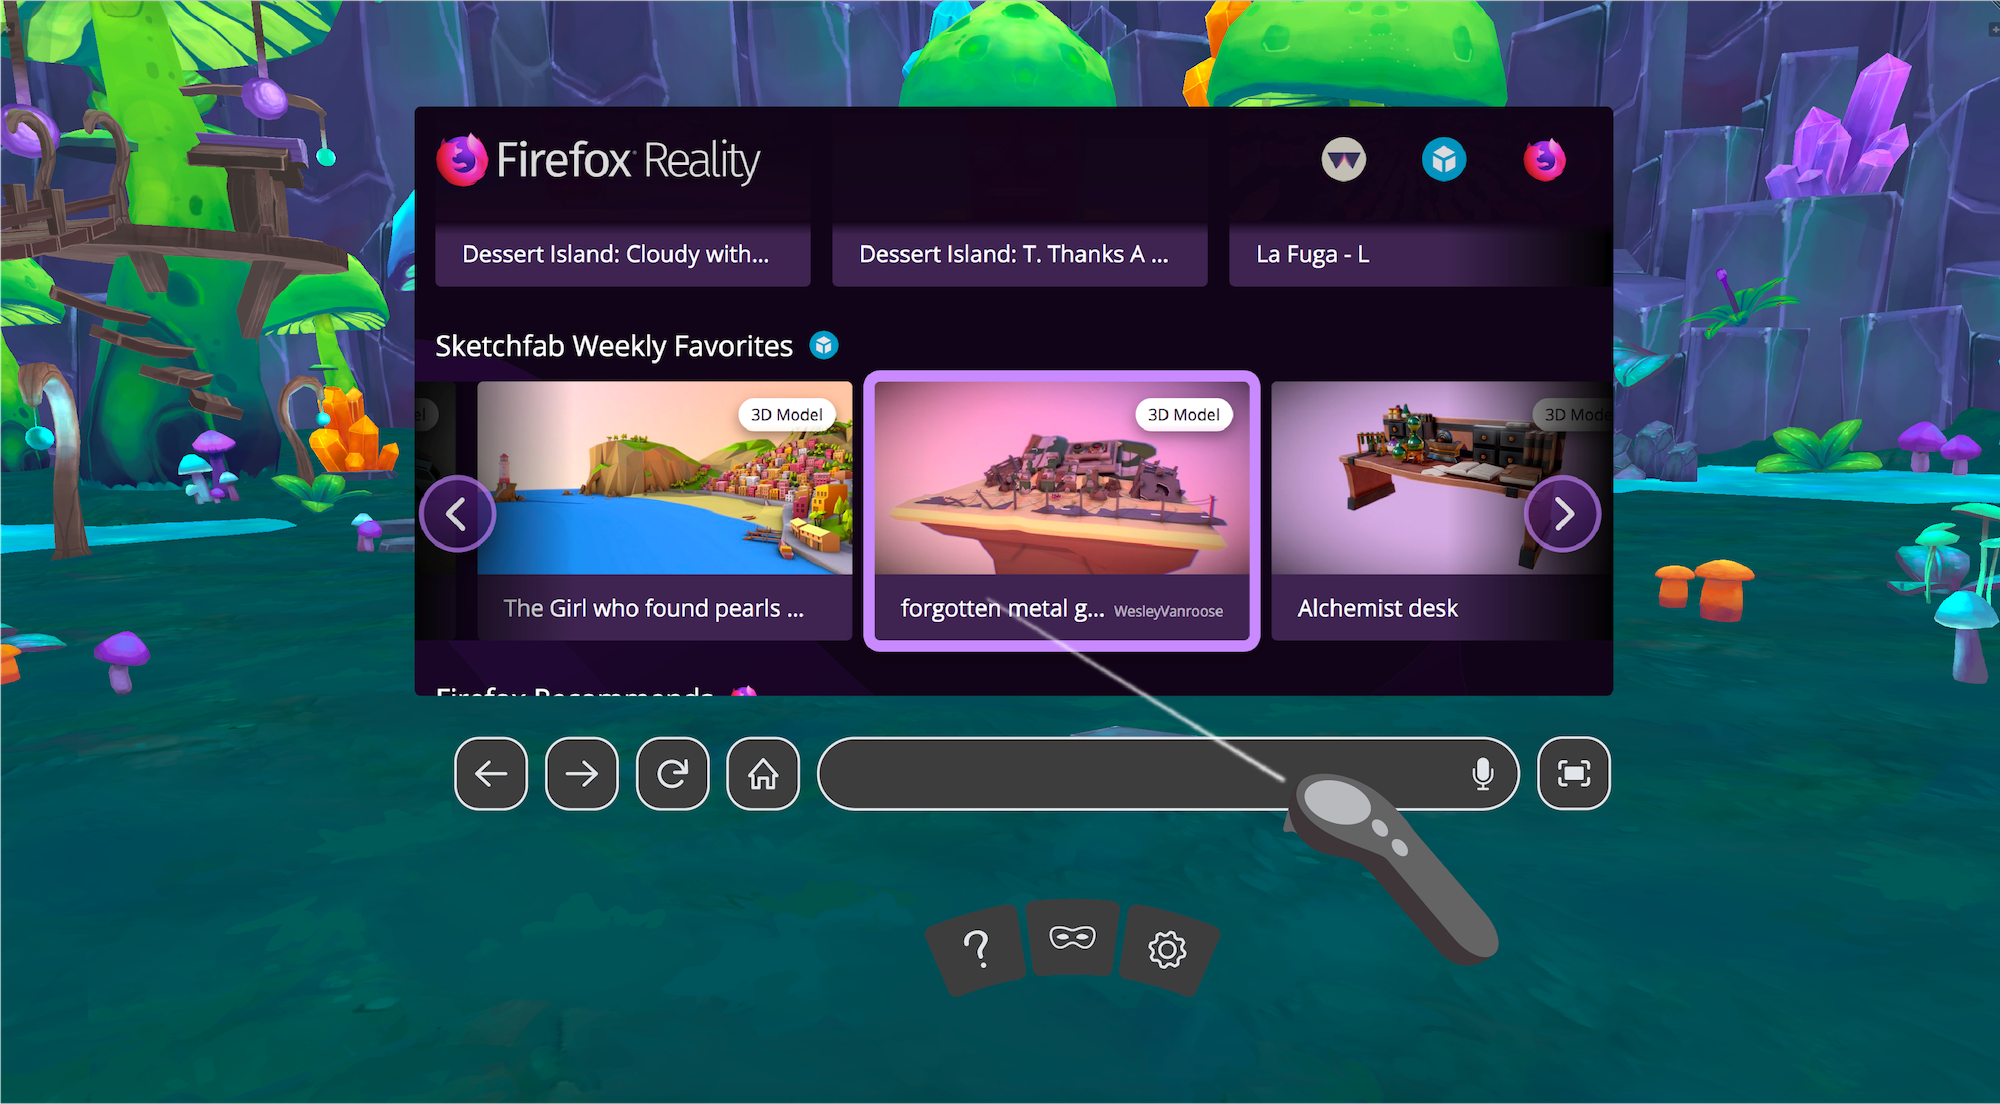 Firefox Reality Browser